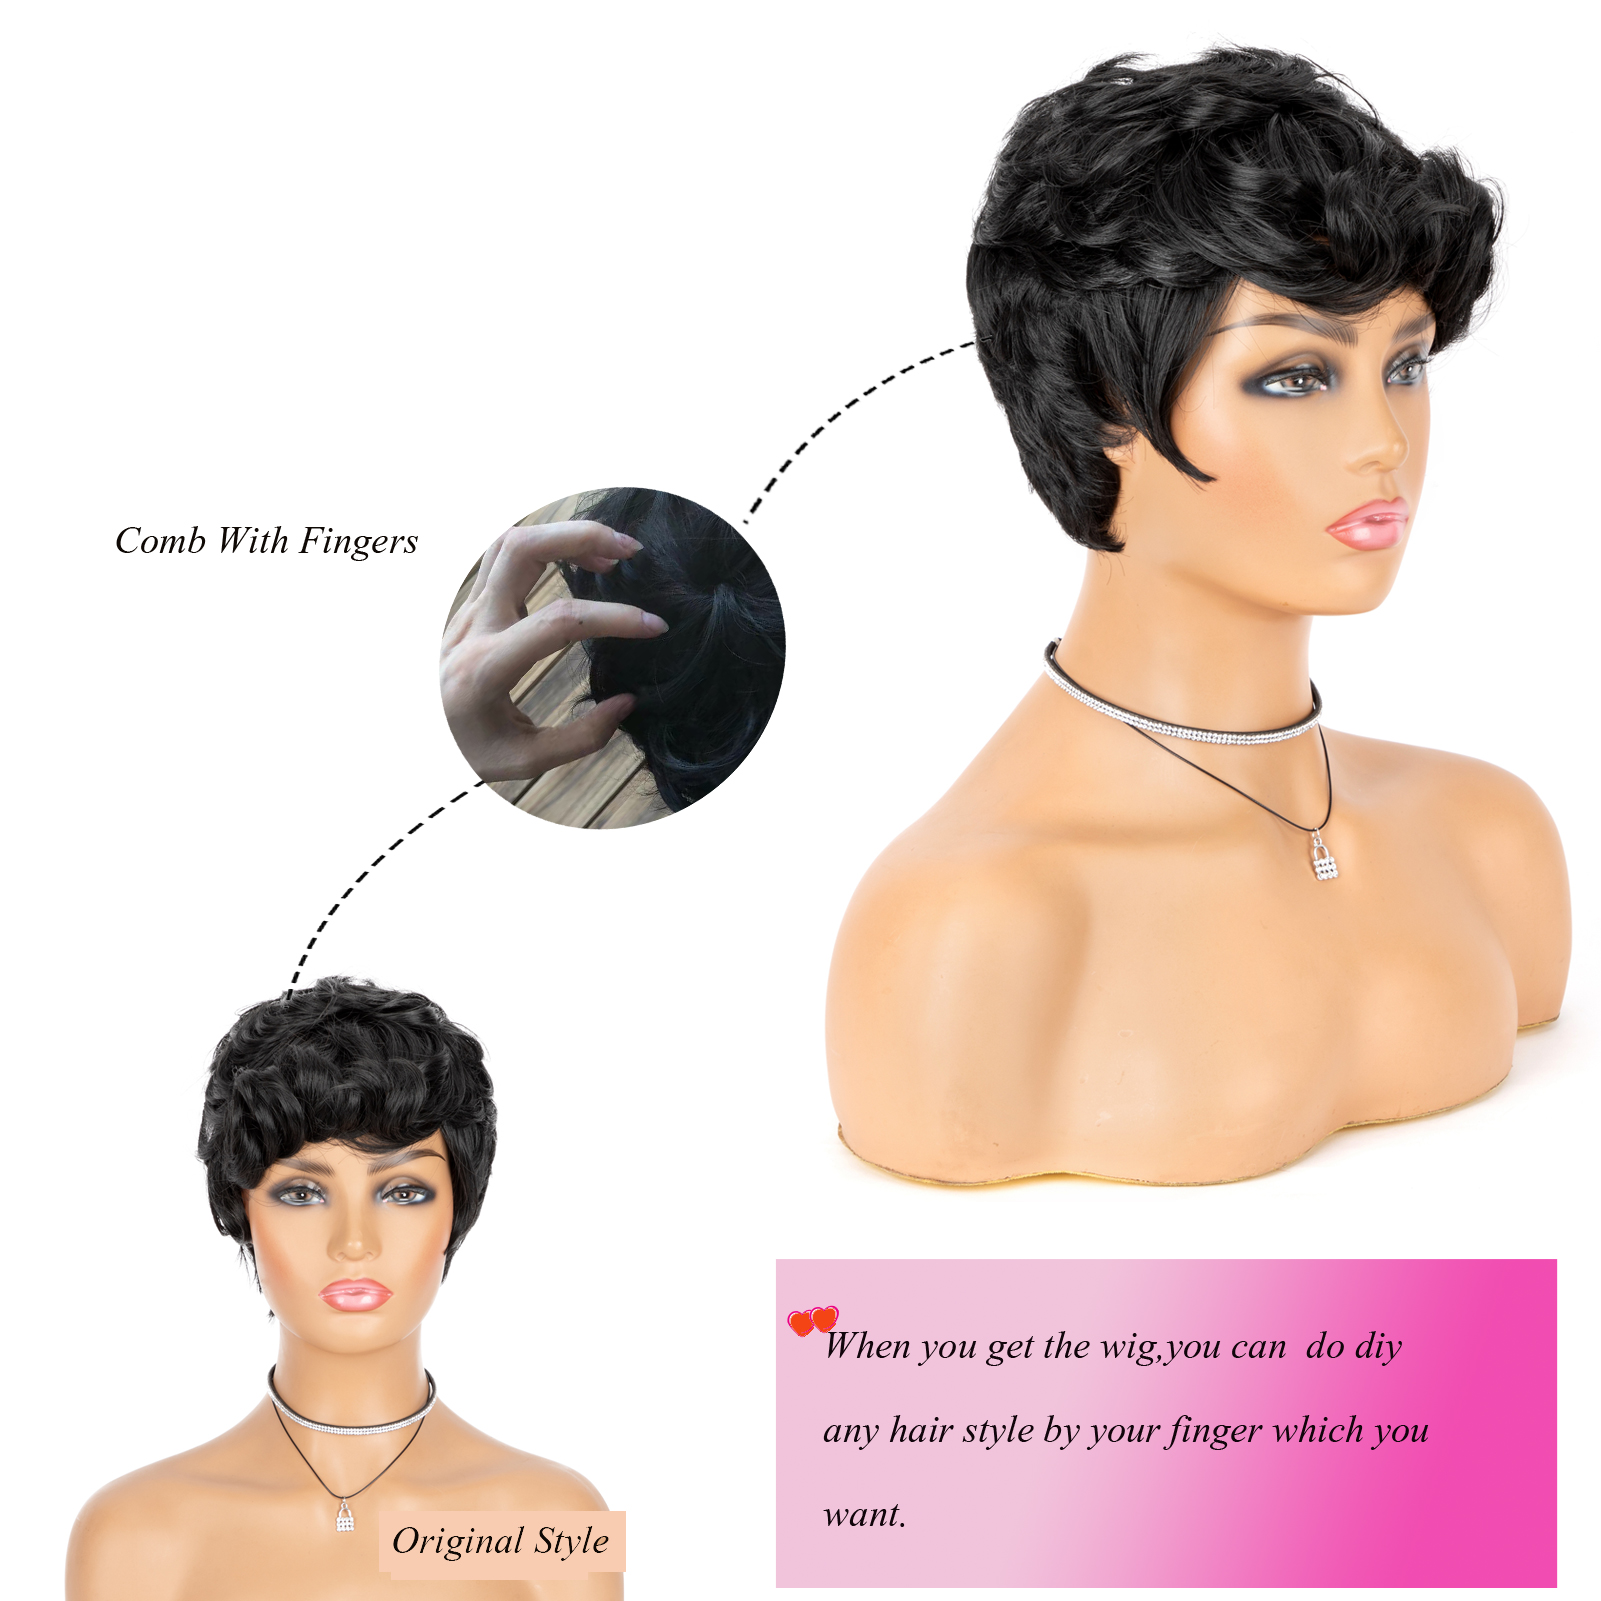 Short Pixie Cut Wig Hair Natural Synthetic Wigs For Women Heat Resistant Wig Natural Hair Women's Fashion Wig